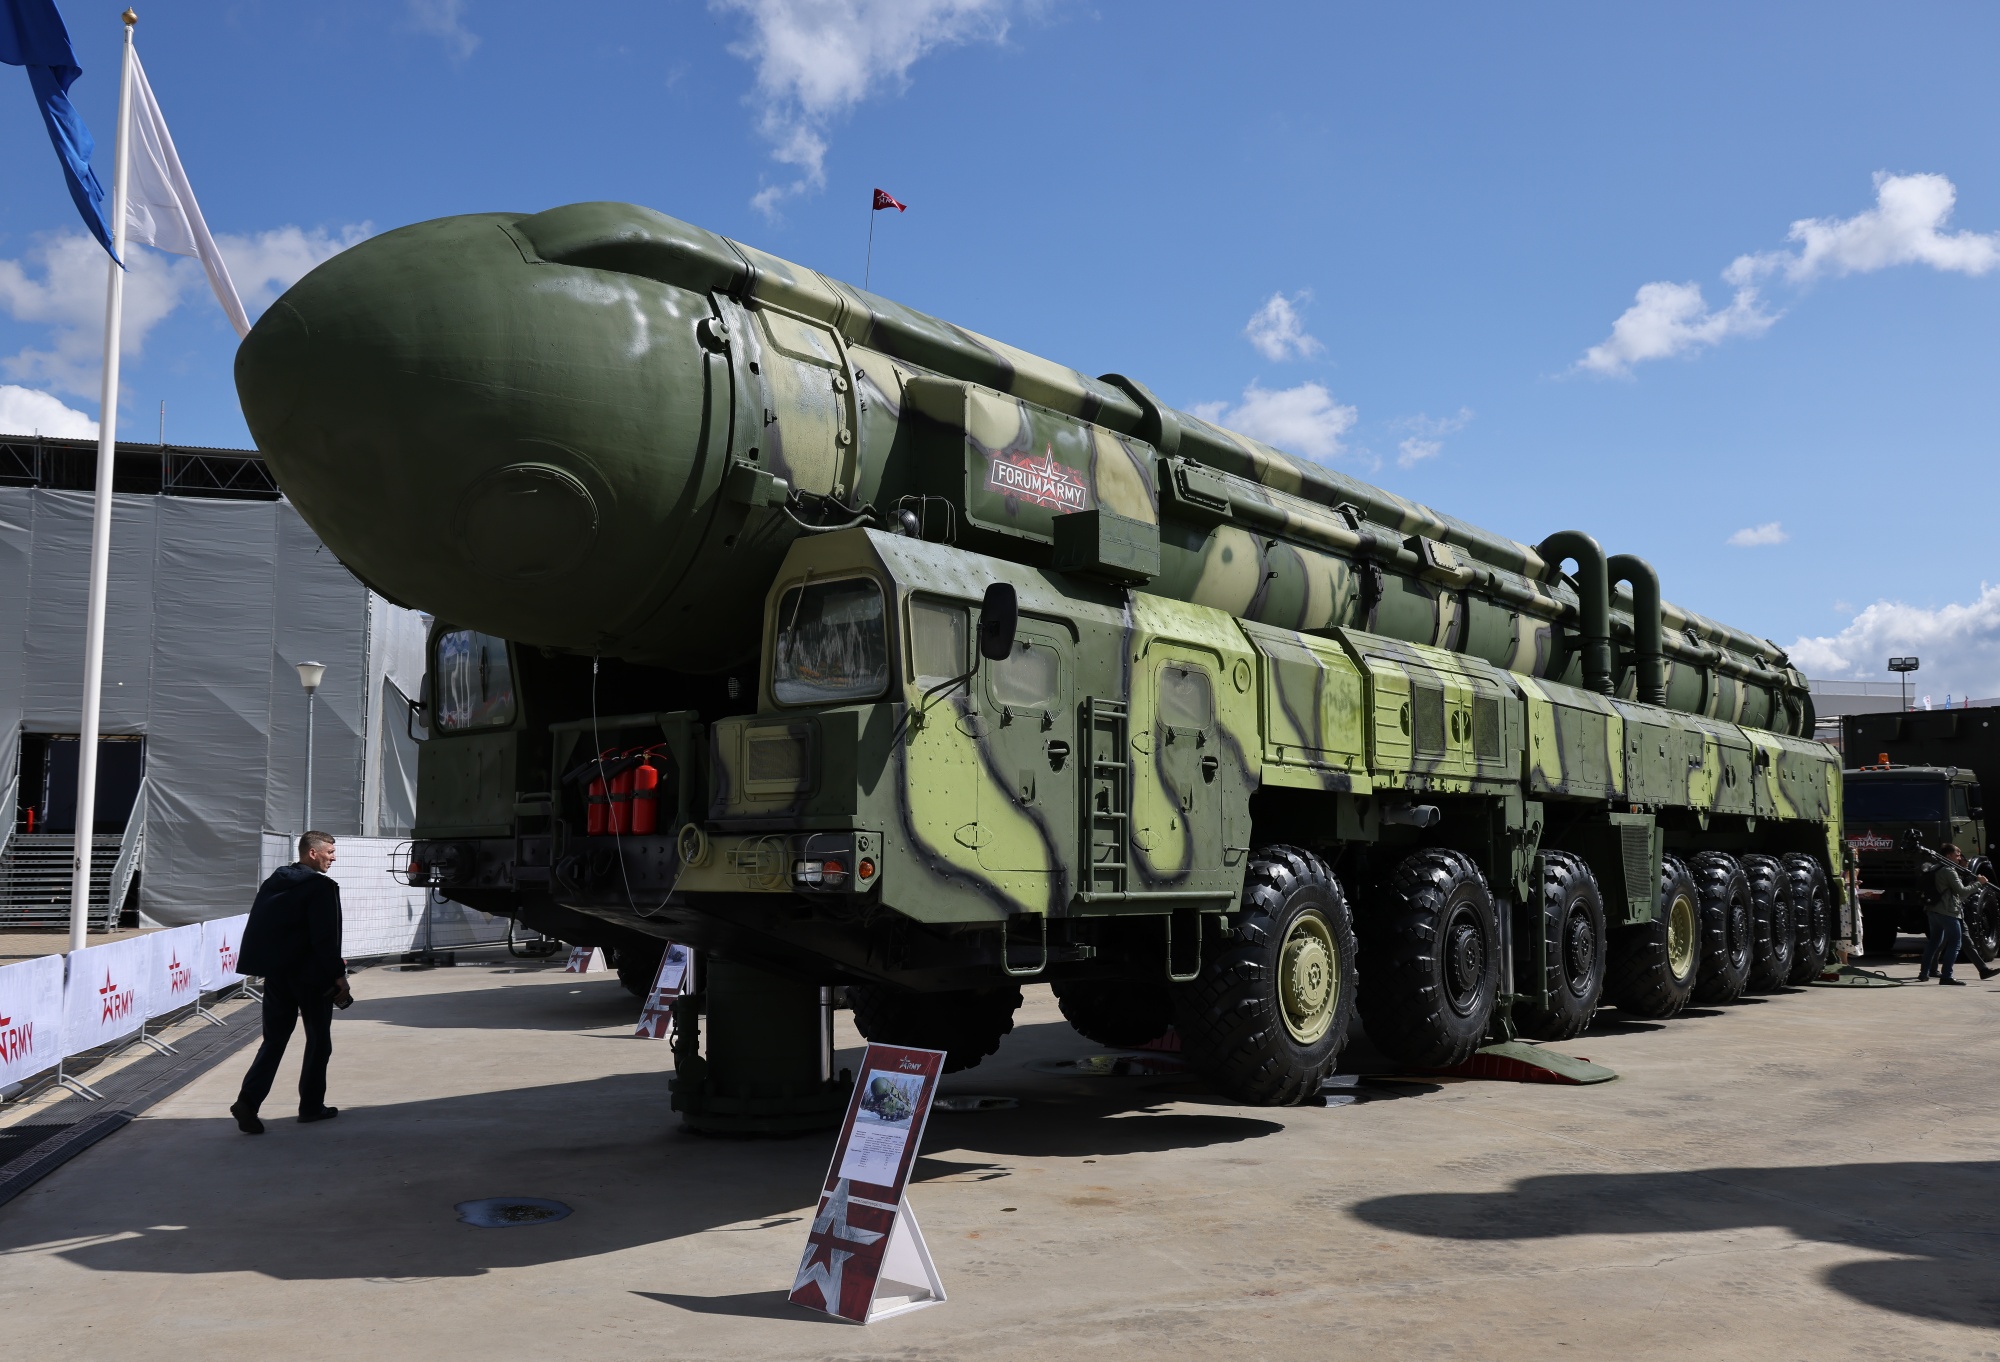 A Russian mobile intercontinental ballistic missile system on display&nbsp;in Moscow on Aug. 22. President&nbsp;Vladimir Putin&nbsp;has&nbsp;recently boasted&nbsp;of the country’s new hypersonic weapons, claiming they are capable of avoiding U.S. defenses at&nbsp;up to&nbsp;20 times the speed of sound. His military plans to conduct drills of his strategic nuclear forces this weekend.